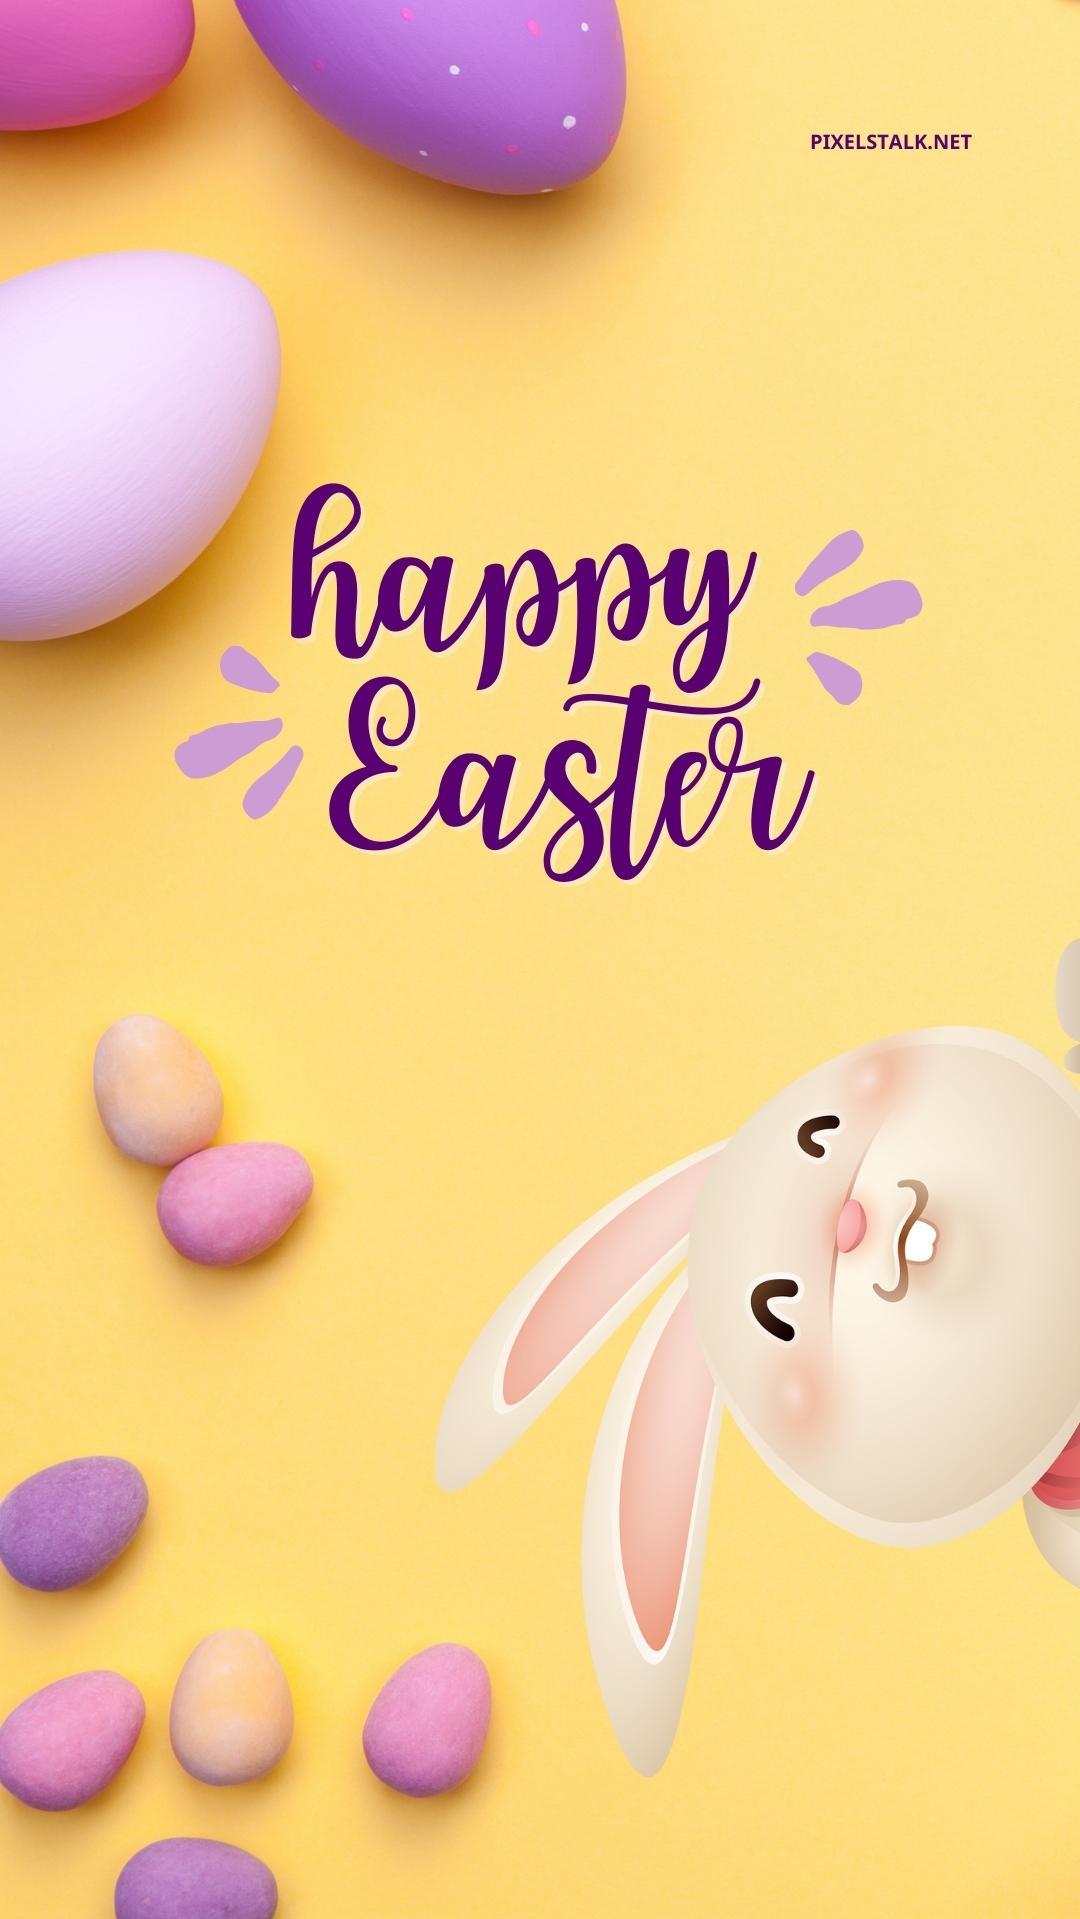 Easter iPhone Wallpapers HD Free download